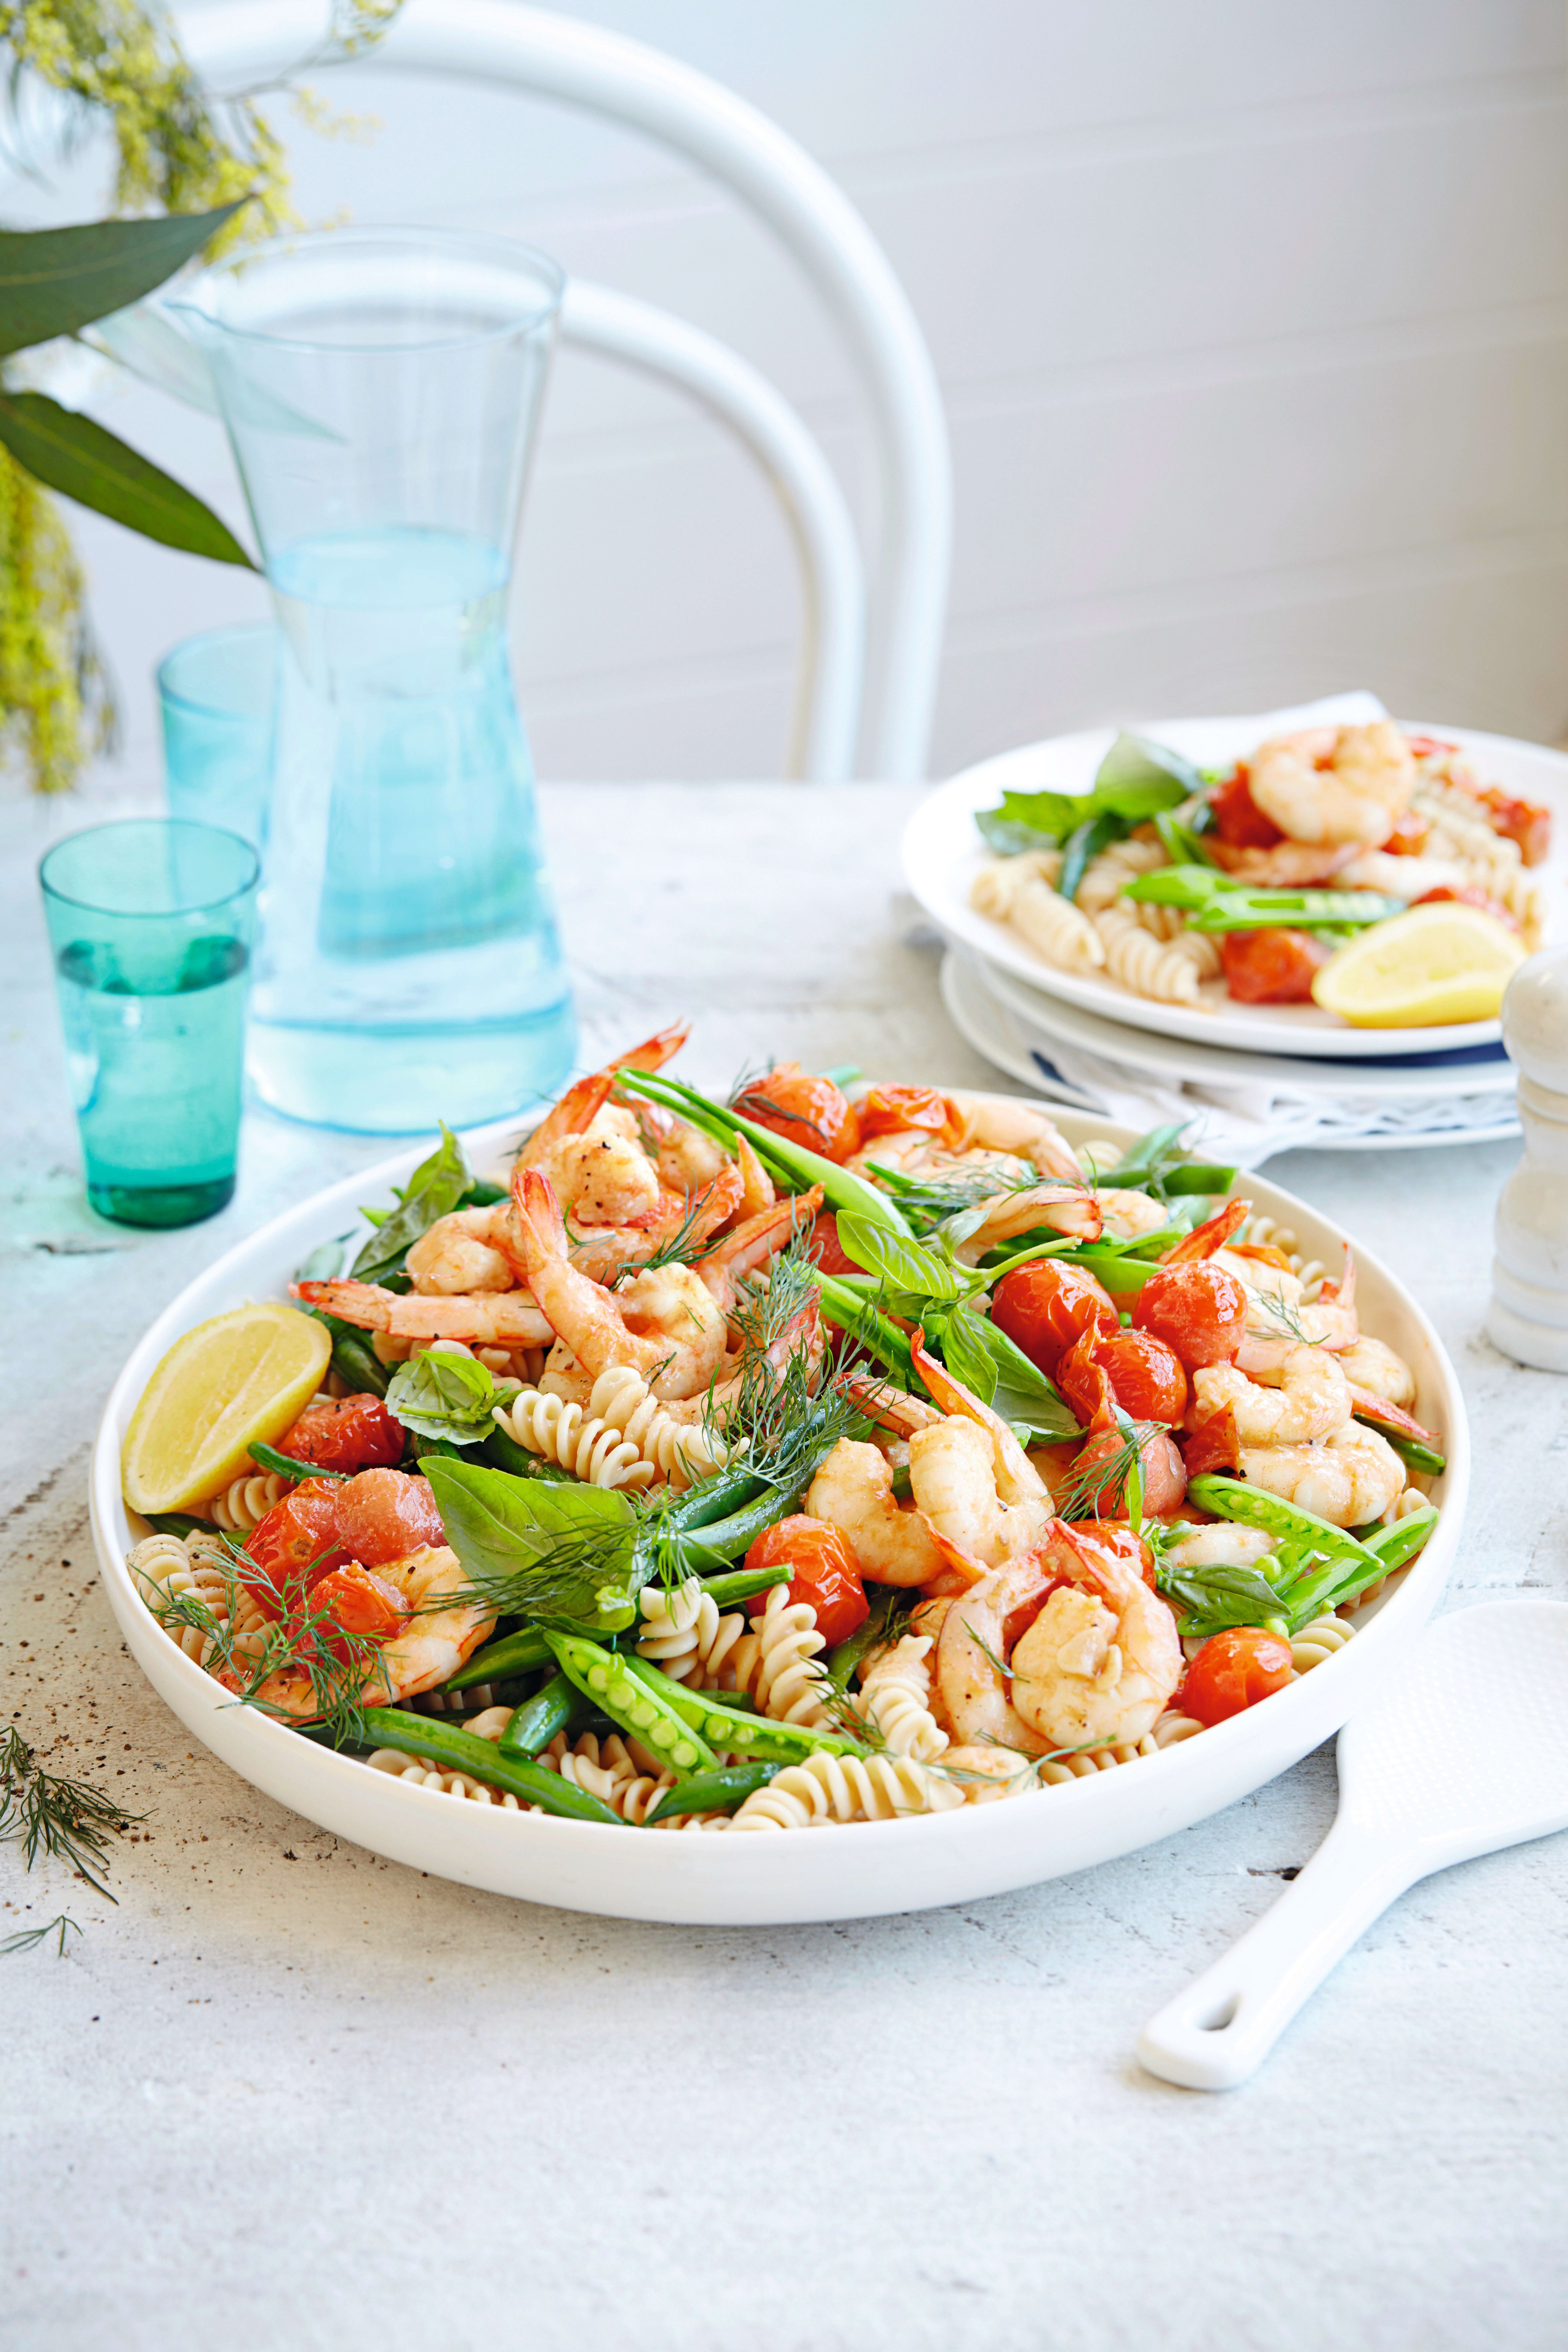 Photo of Garlic prawn pasta salad with tomatoes & herbs by WW